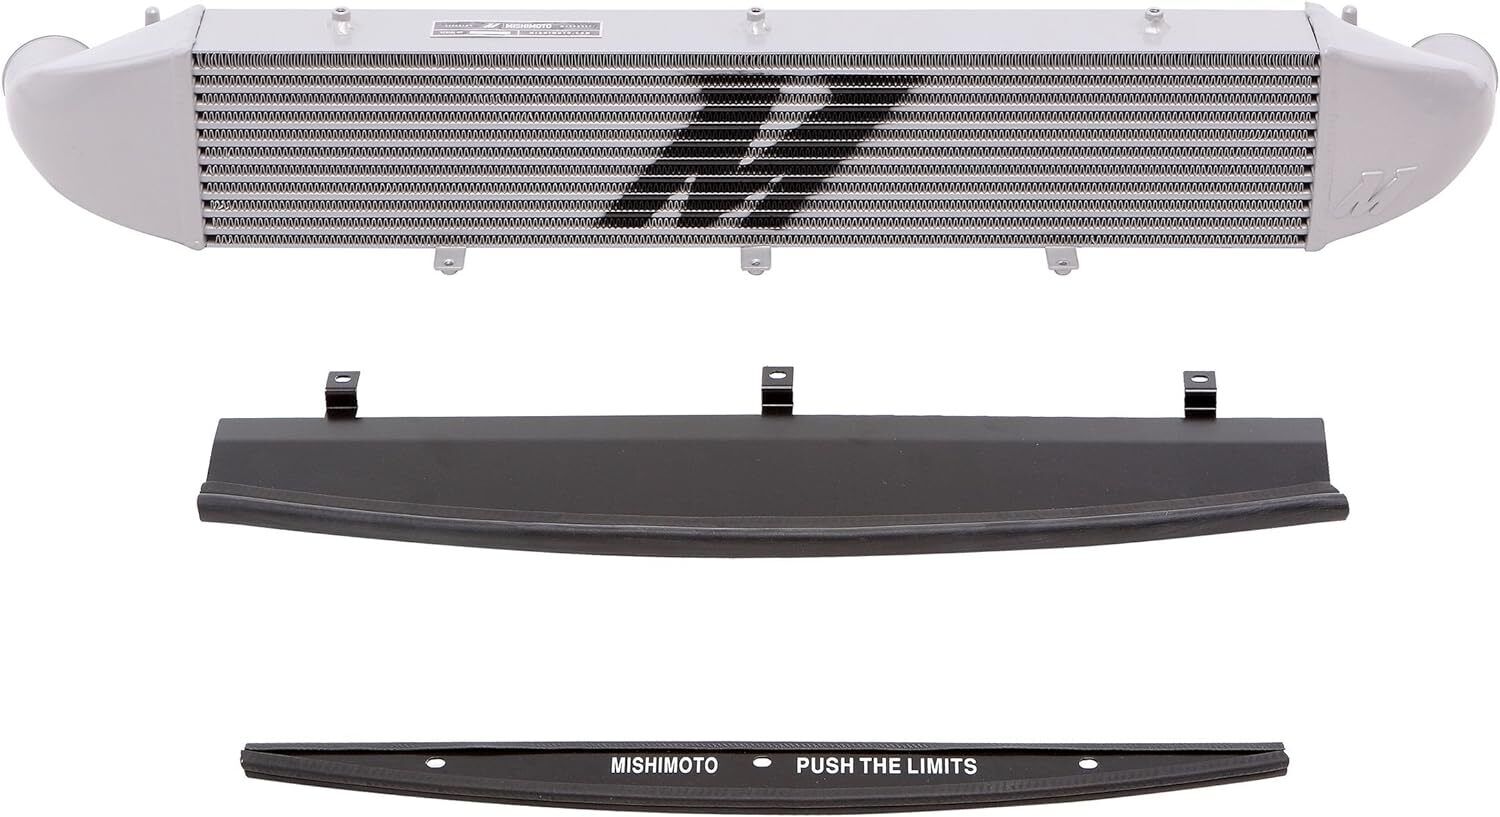 Mishimoto Performance Aluminum Intercooler Silver For 2014+ Ford Fiesta ST